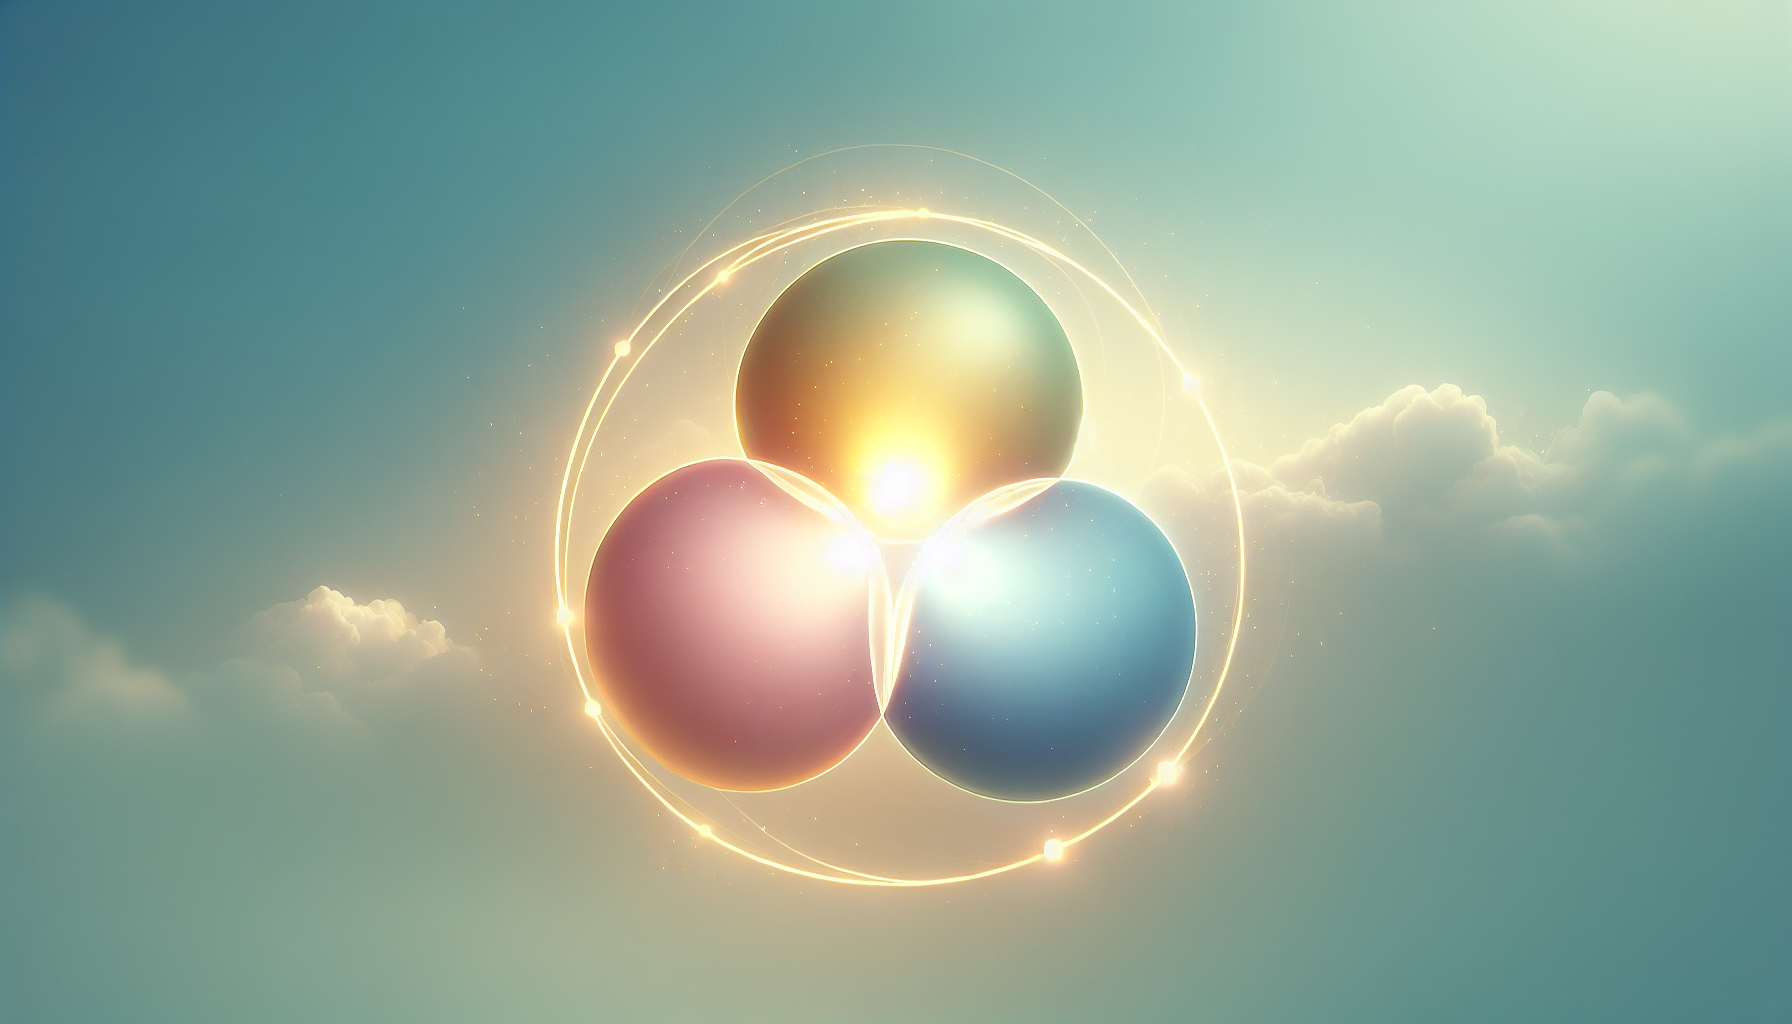 Illustration of three interconnected circles representing the core components of self-compassion